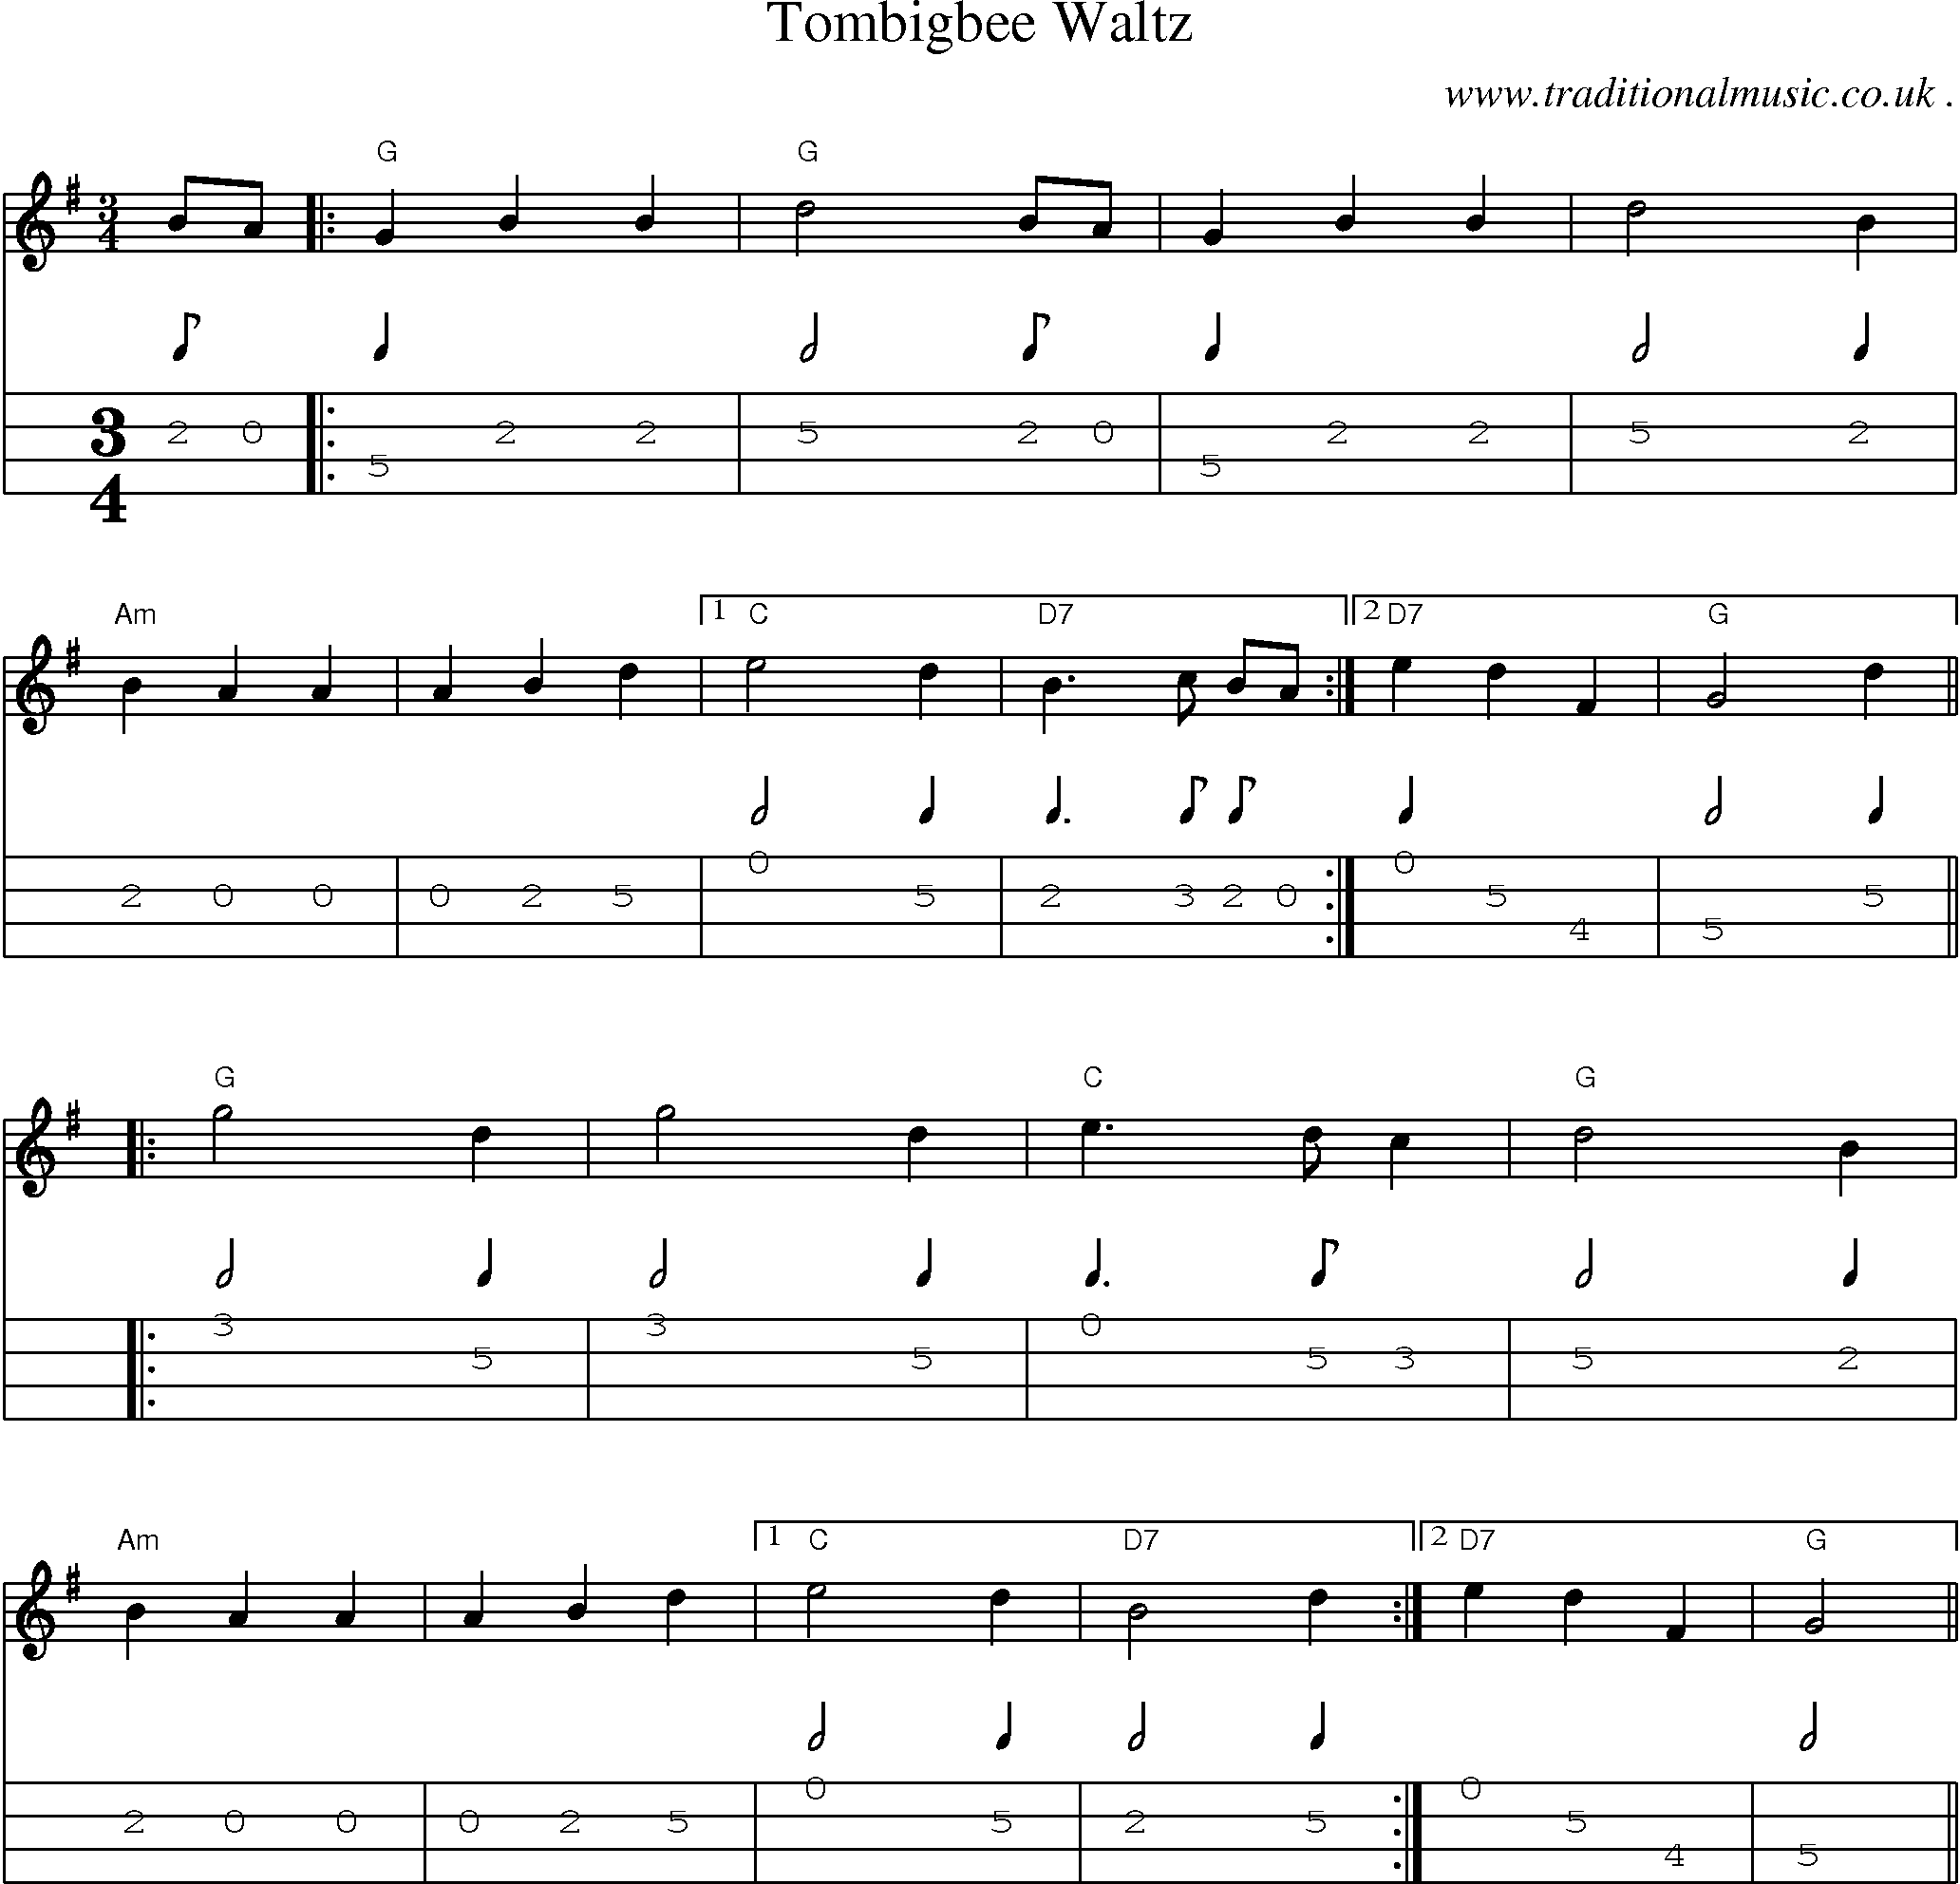 Music Score and Mandolin Tabs for Tombigbee Waltz